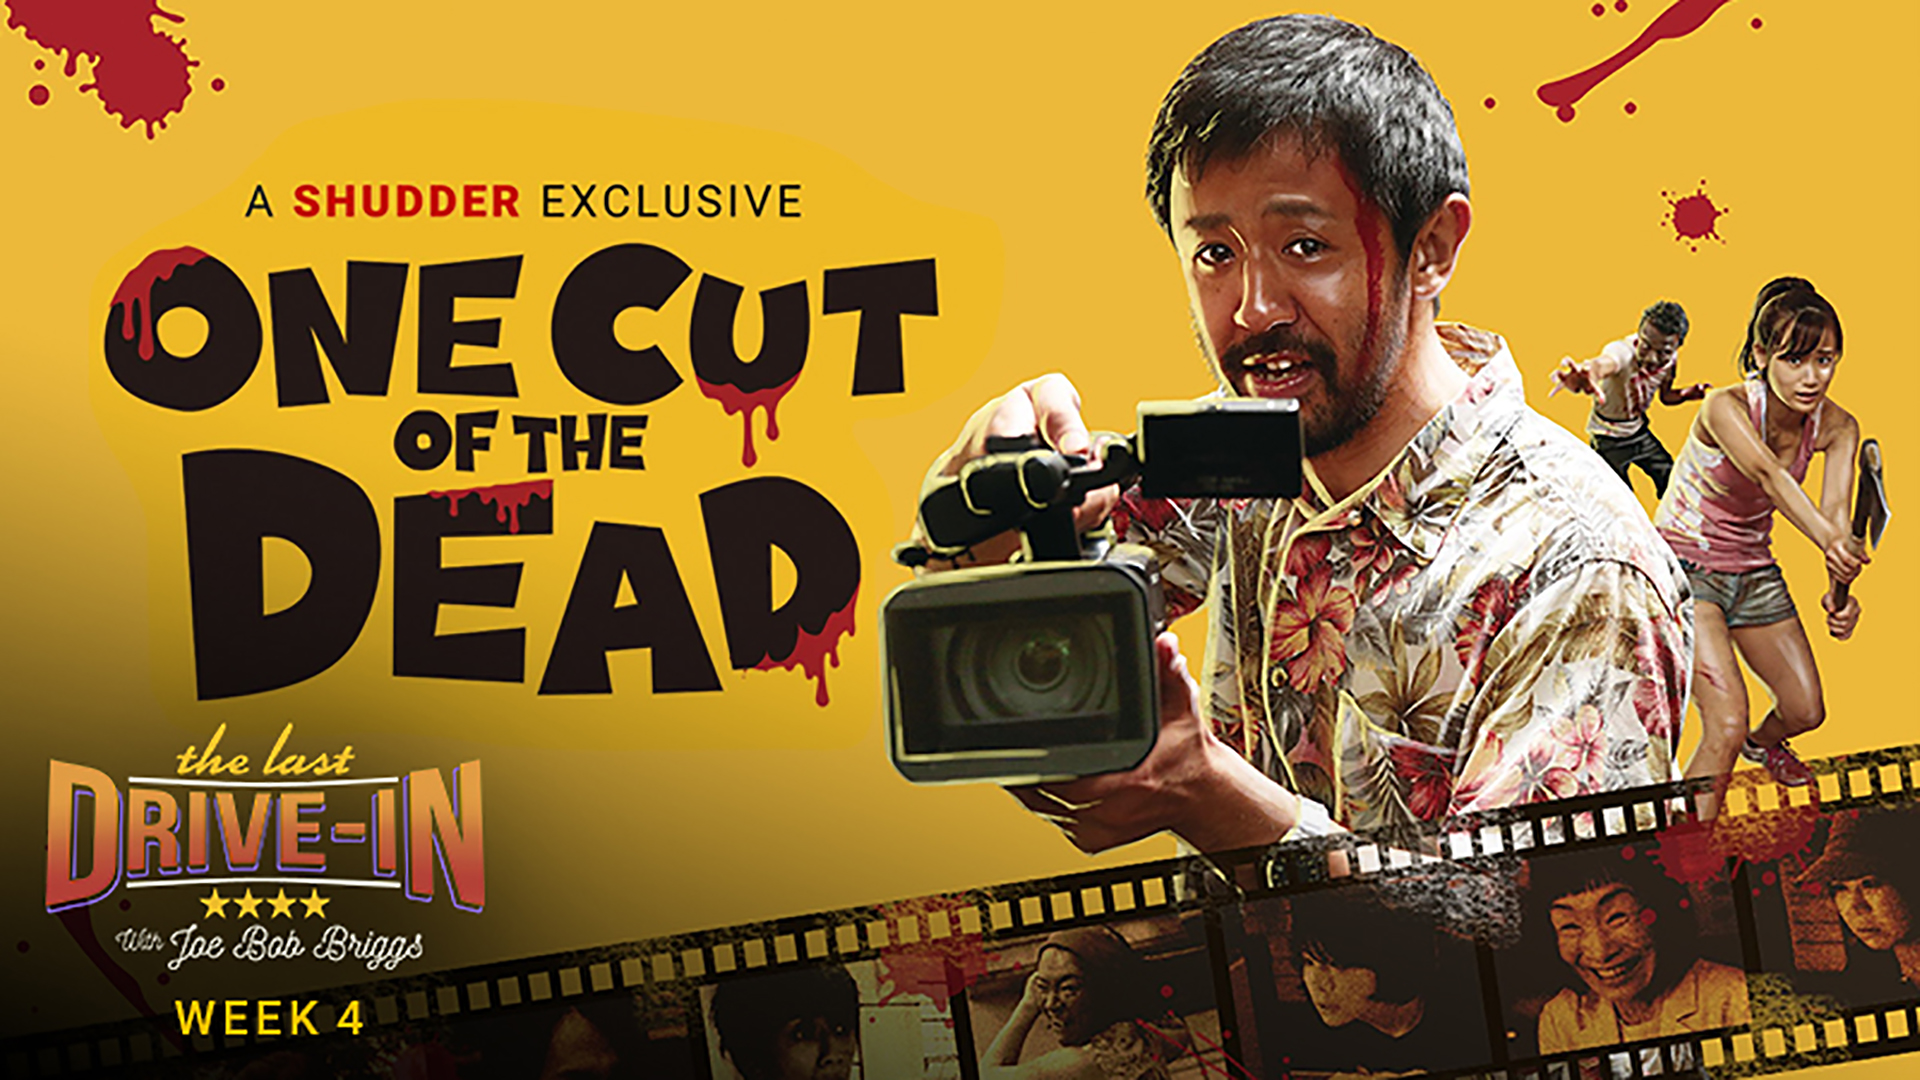 Week 4: One Cut of the Dead, While shooting a low-budget zombie film in an abandoned warehouse, the crew find themselves caught between actual zombies and a mad director who won't stop rolling., TV-MA, Season 1028422, Episode 8